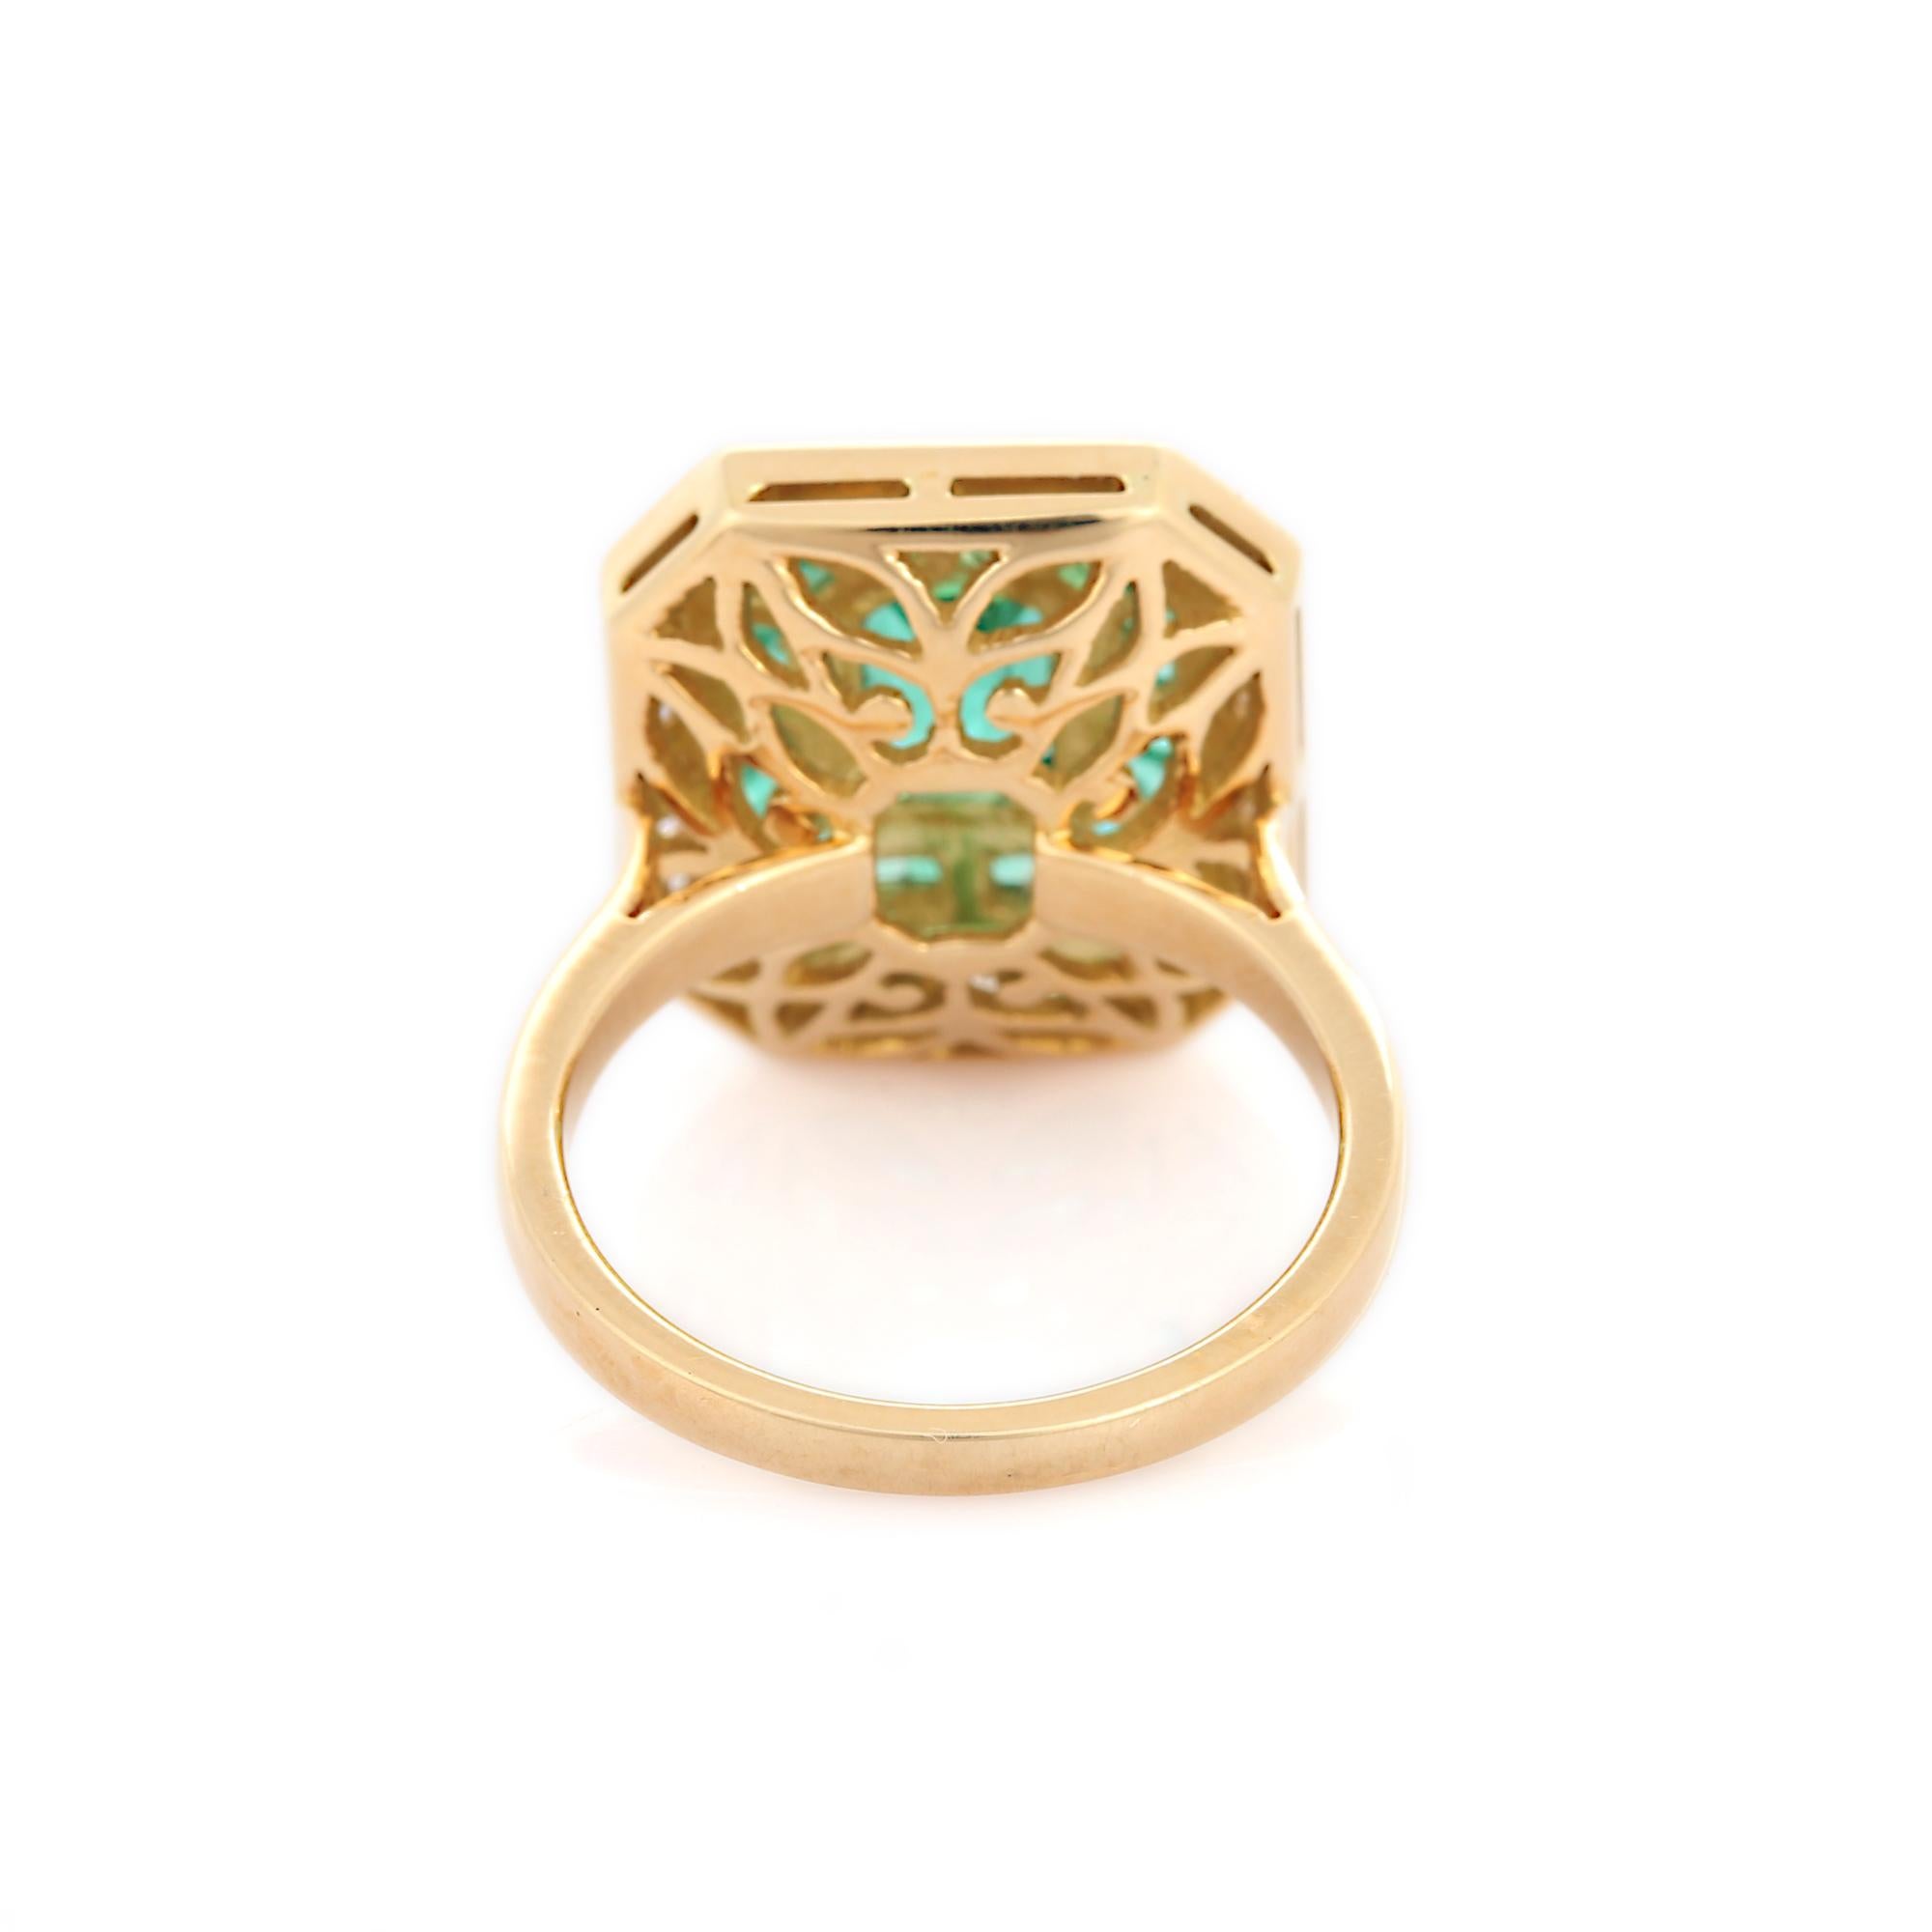 For Sale:  3.03 CTW Diamond and Emerald Cocktail Ring in 18 Karat Solid Yellow Gold 6